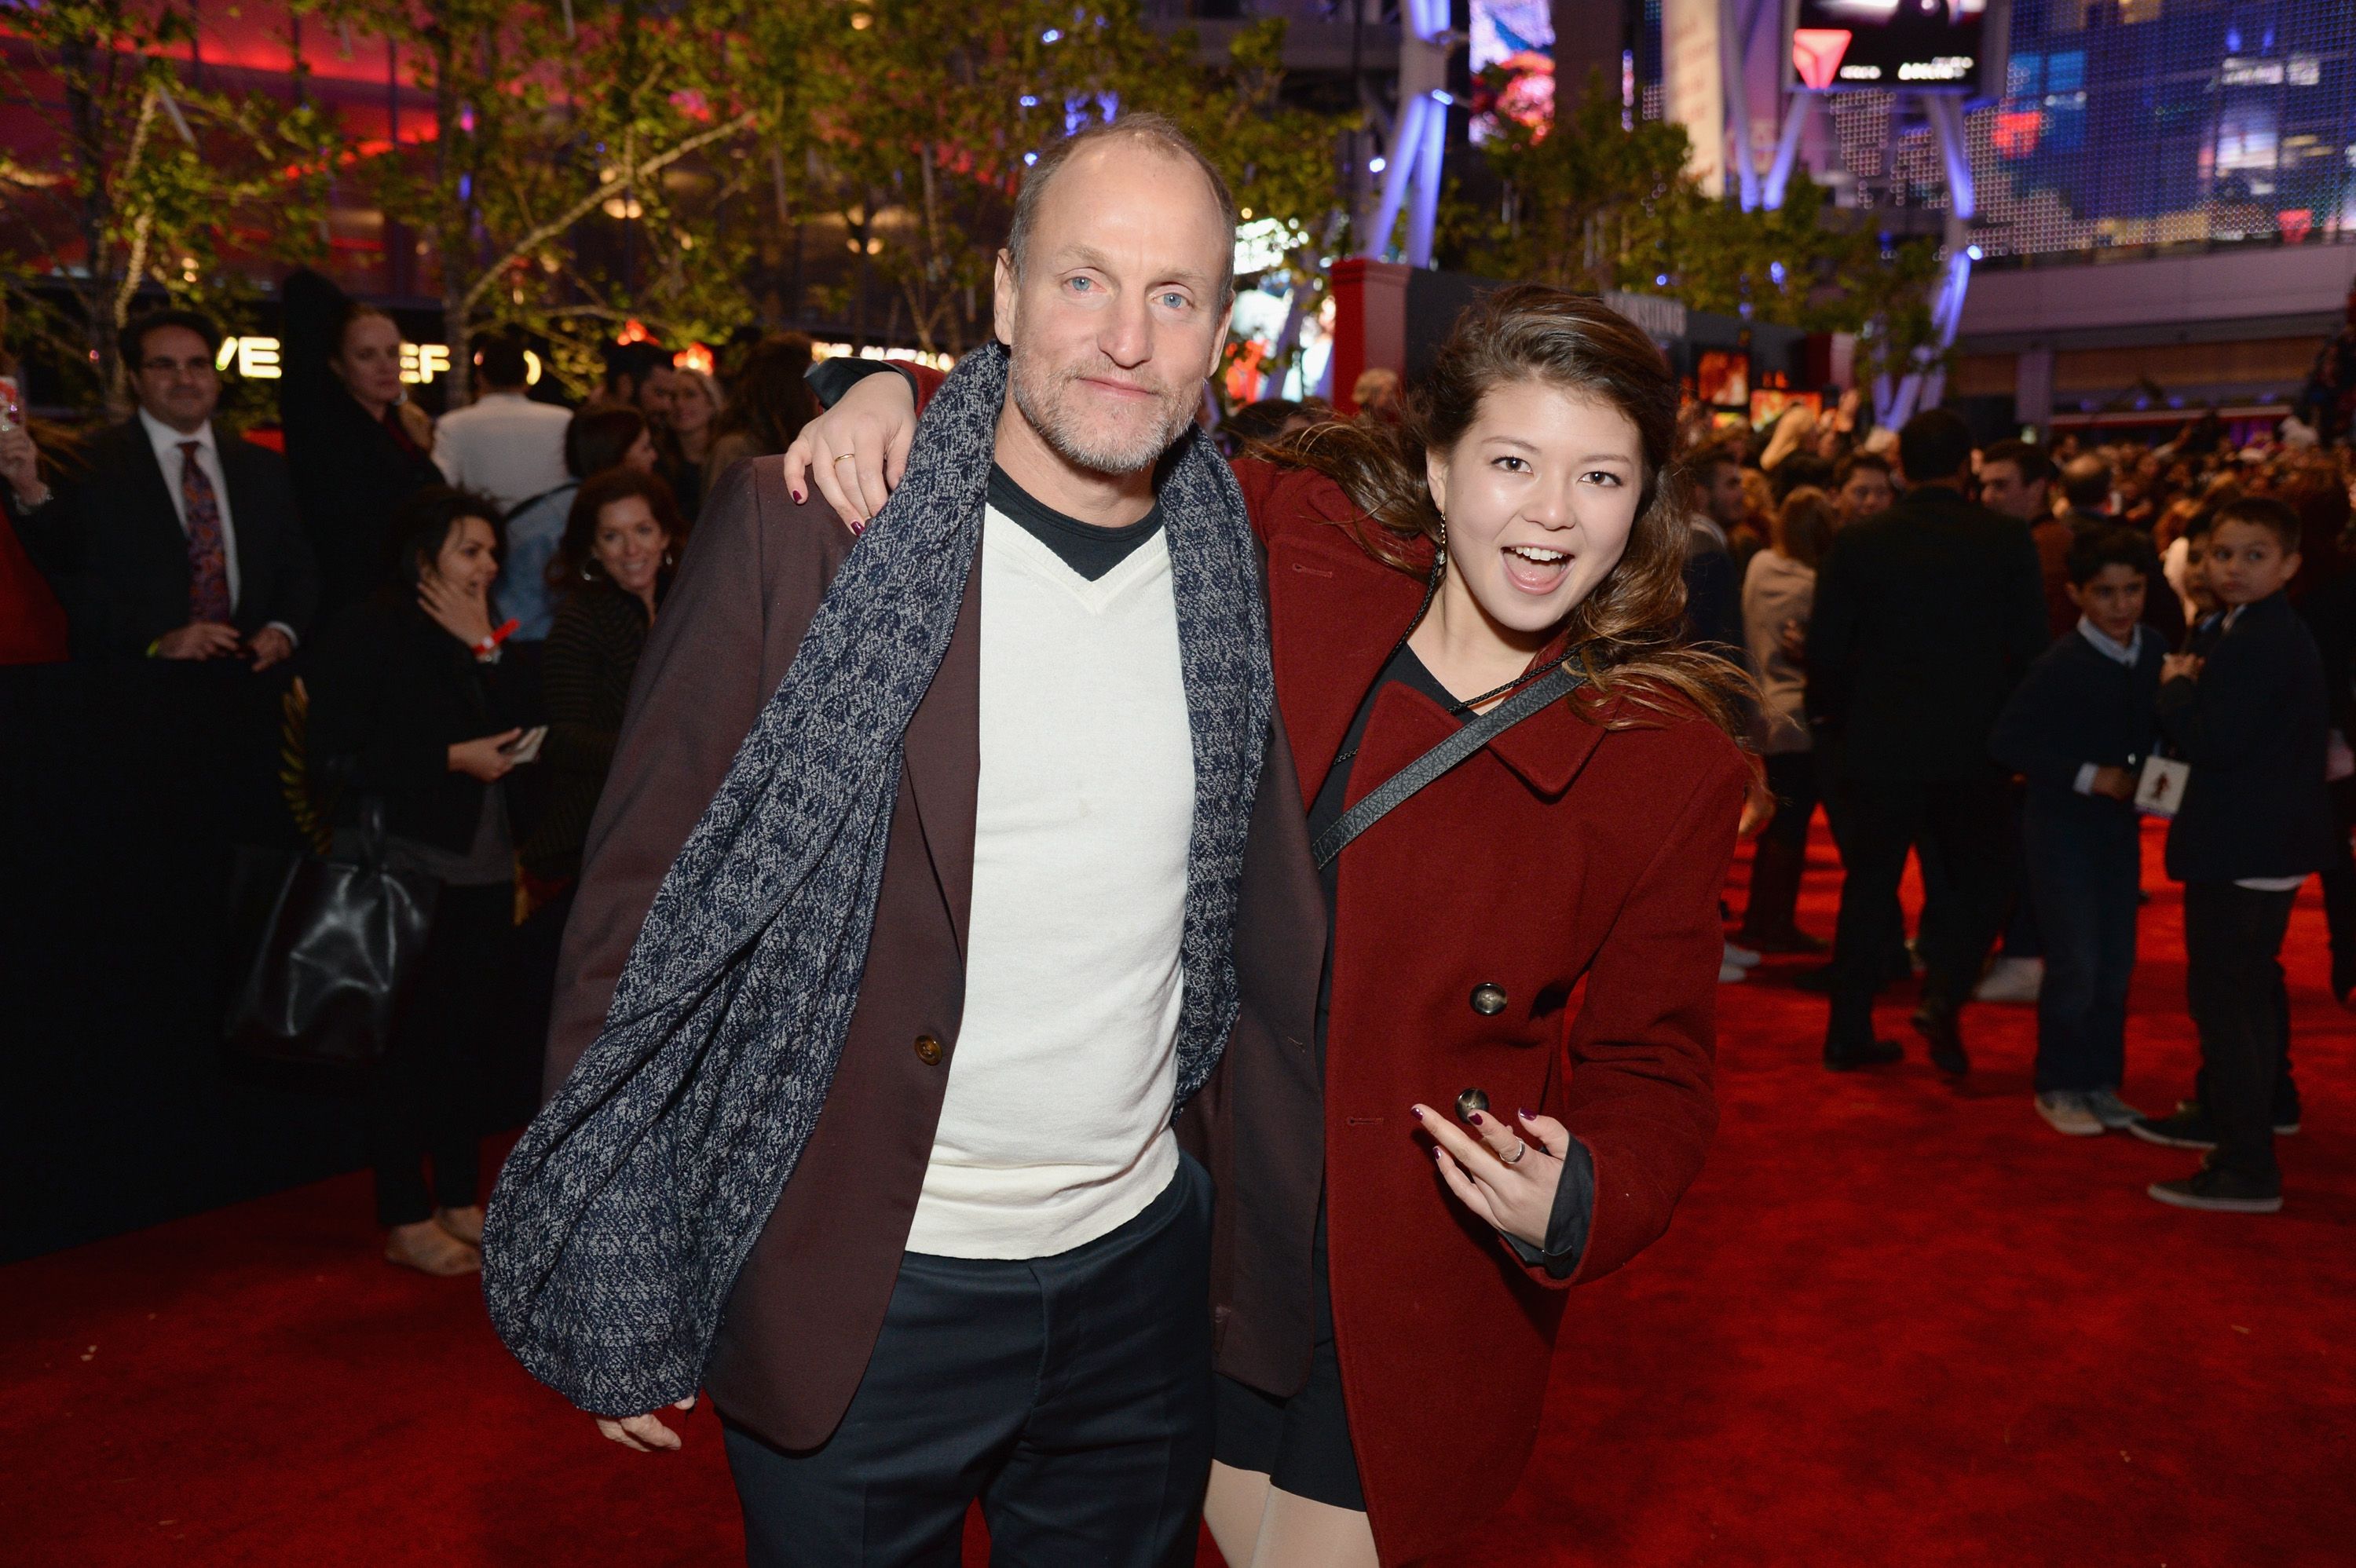 Woody Harrelson and Zoe Harrelson during "Hunger Games: Mockingjay Part 2" Los Angeles Premiere on November 16, 2015, in Los Angeles, California. | Source: Getty Images